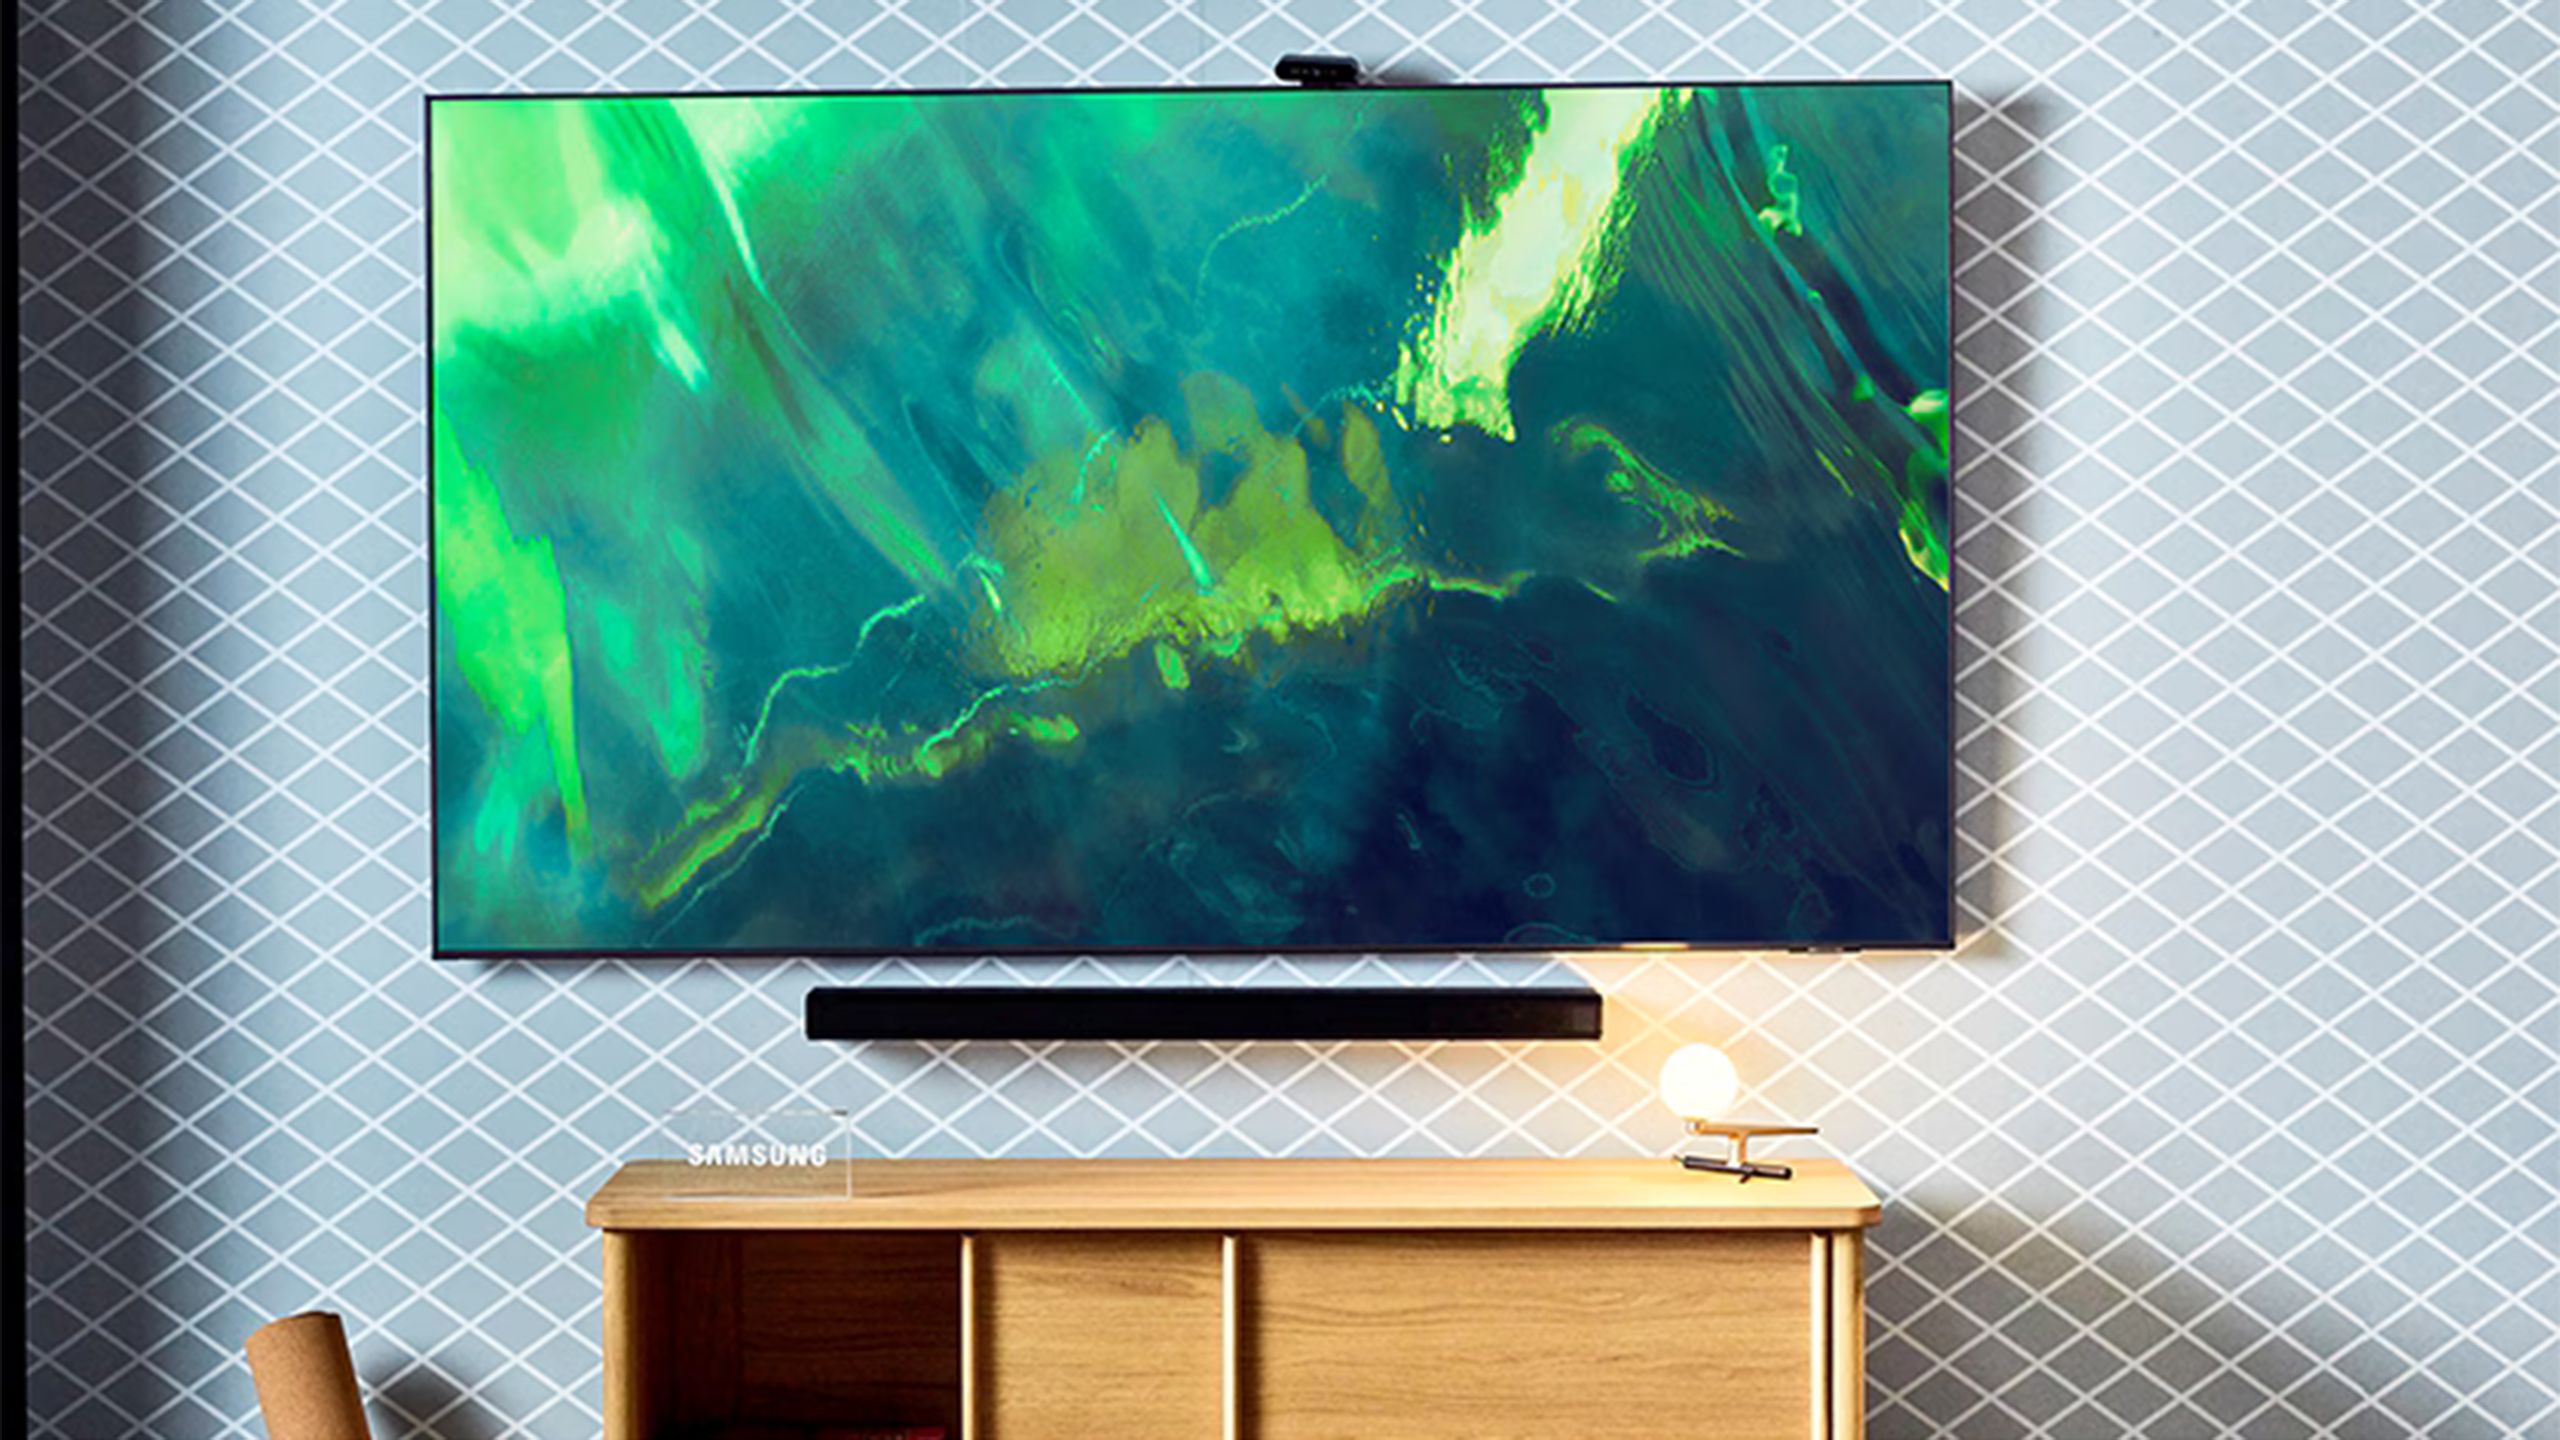 6 things to know about Samsung’s new 98-inch TV